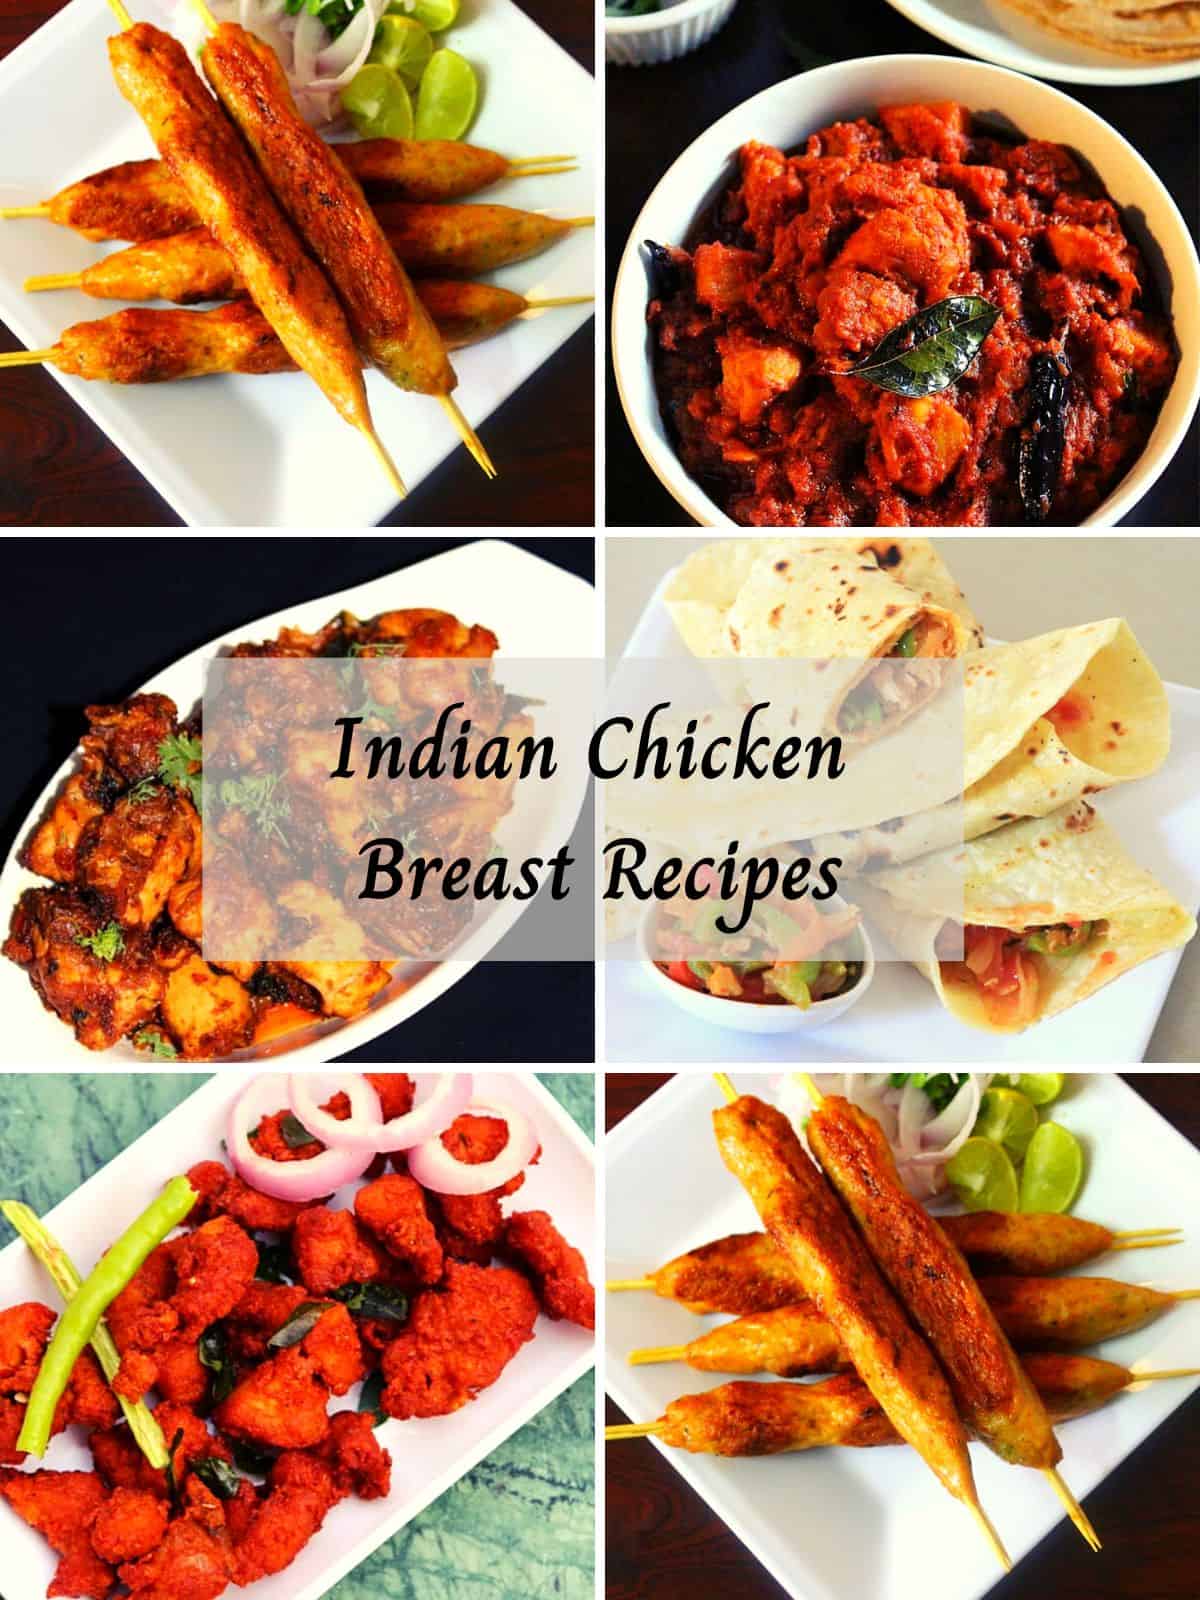 indian style chicken breast recipes in the collage